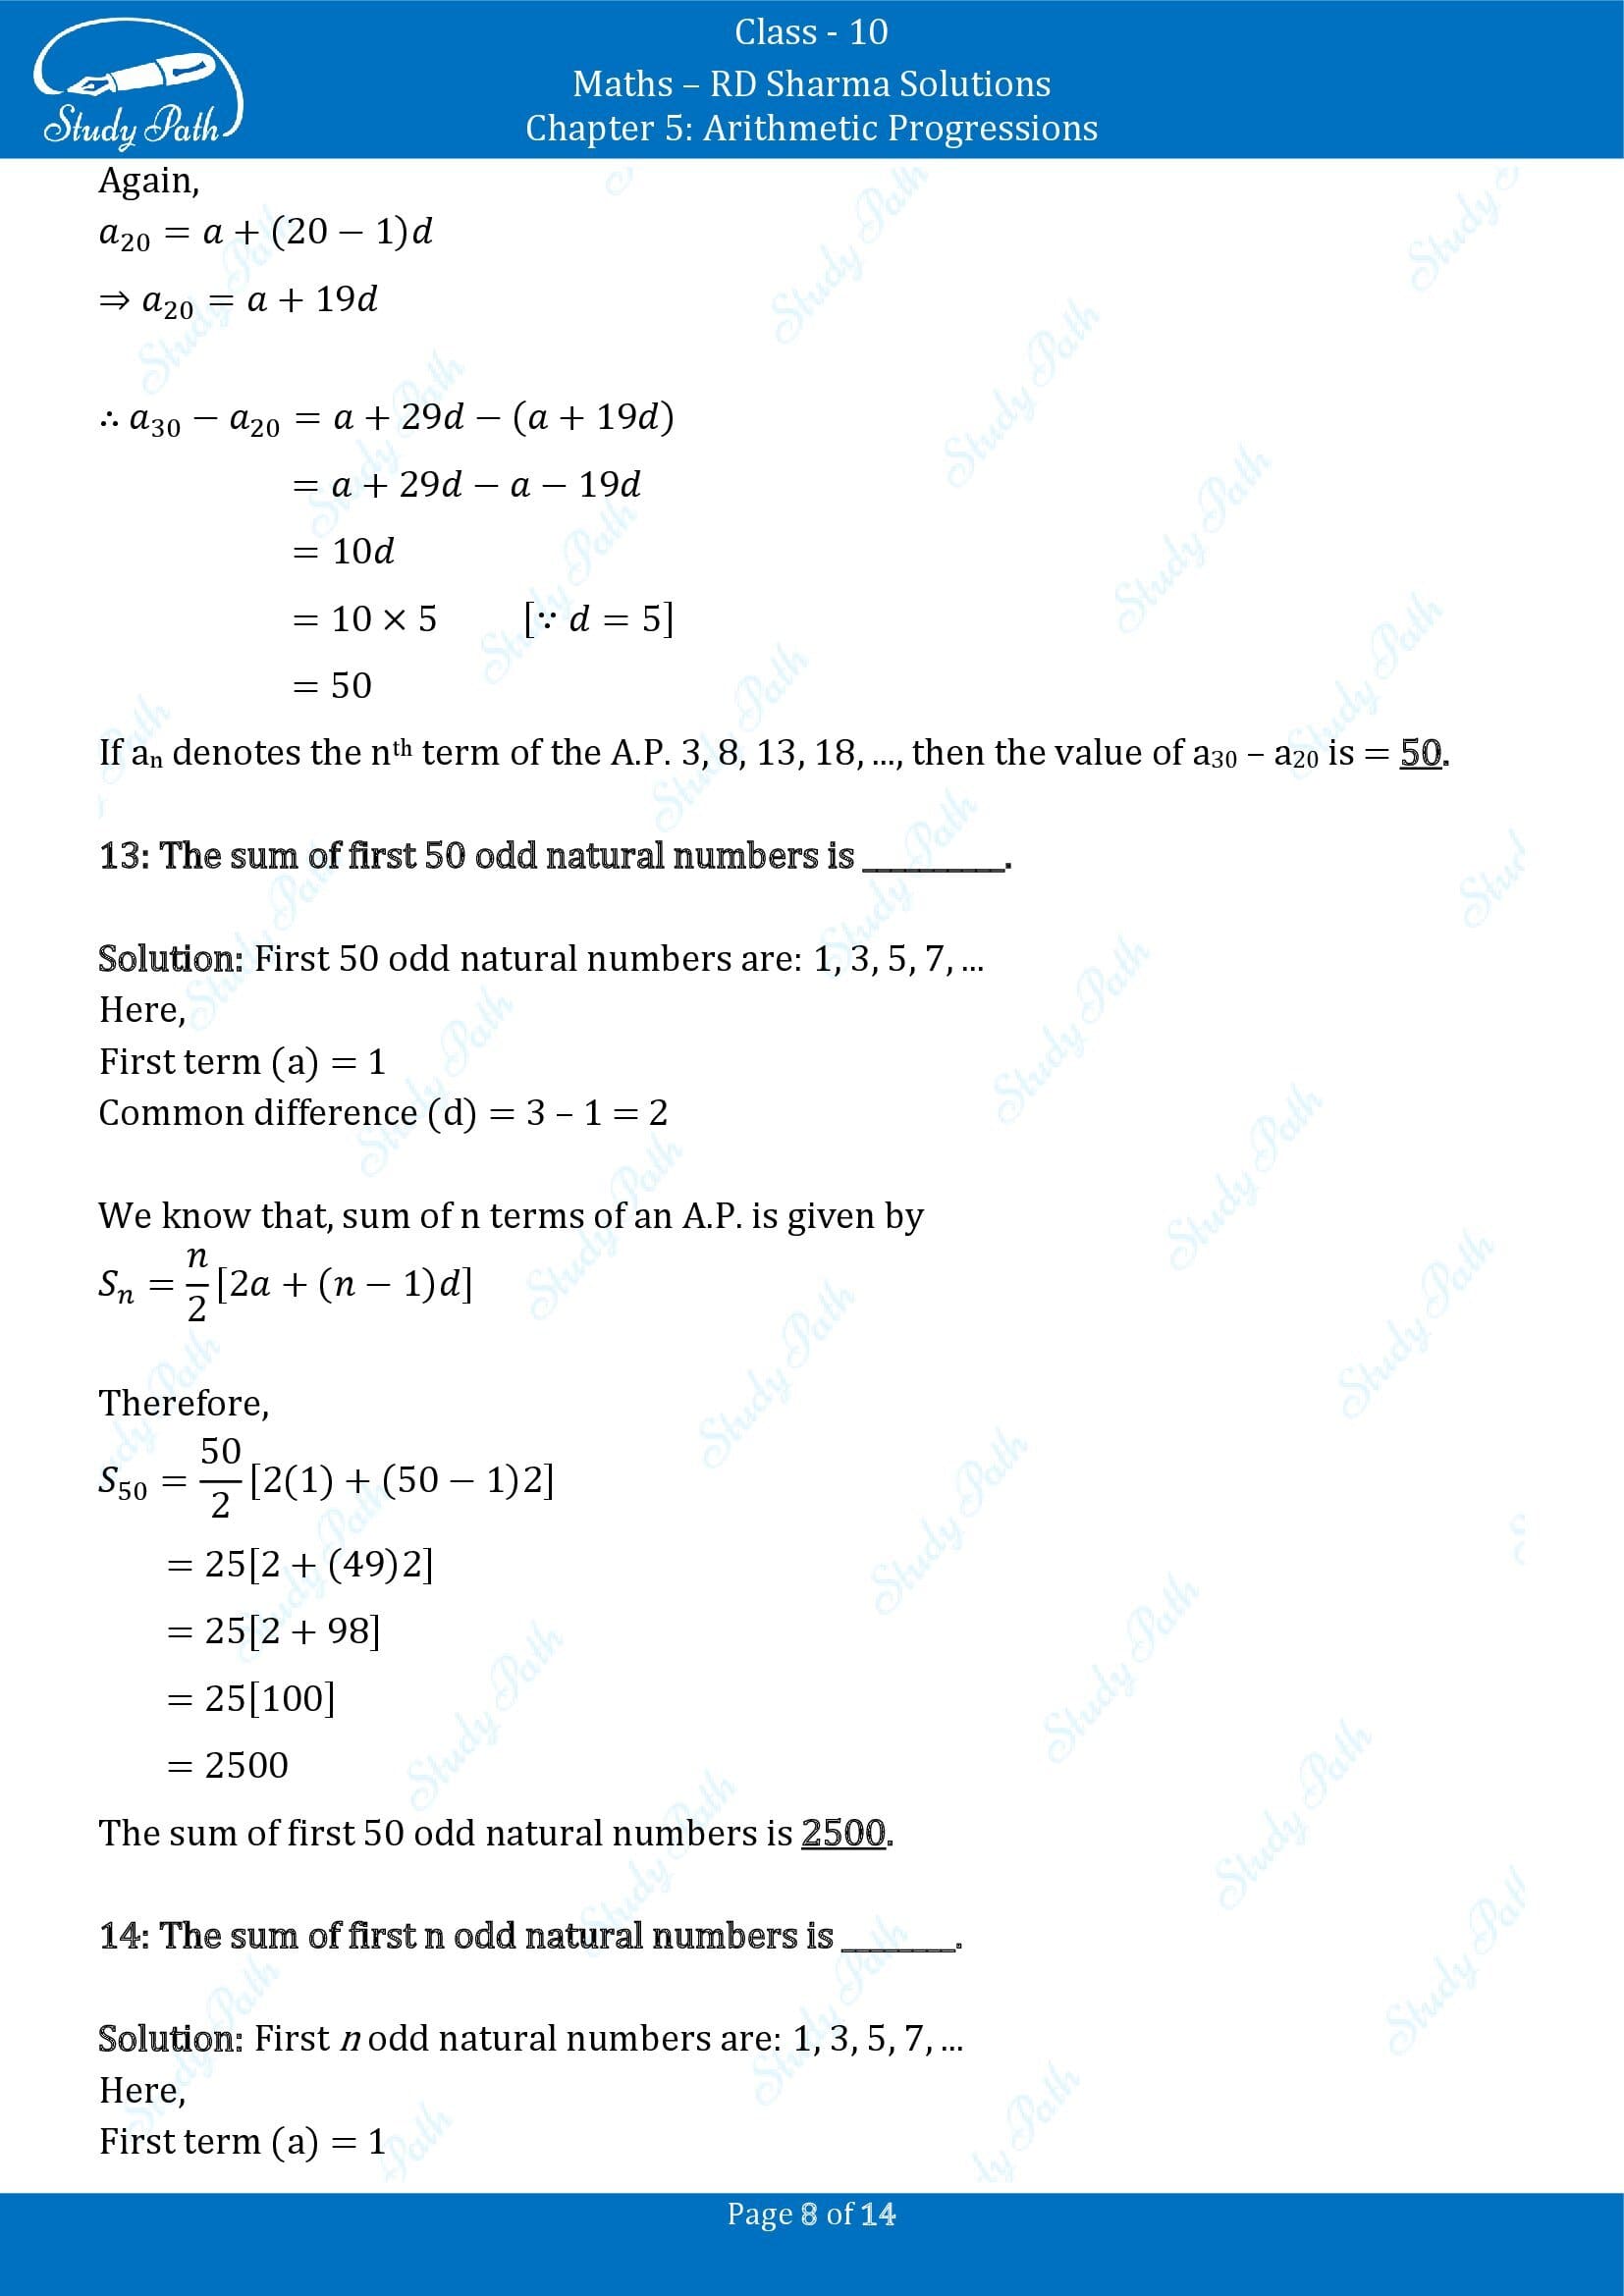 RD Sharma Solutions Class 10 Chapter 5 Arithmetic Progressions Fill in the Blank Type Questions FBQs 00008